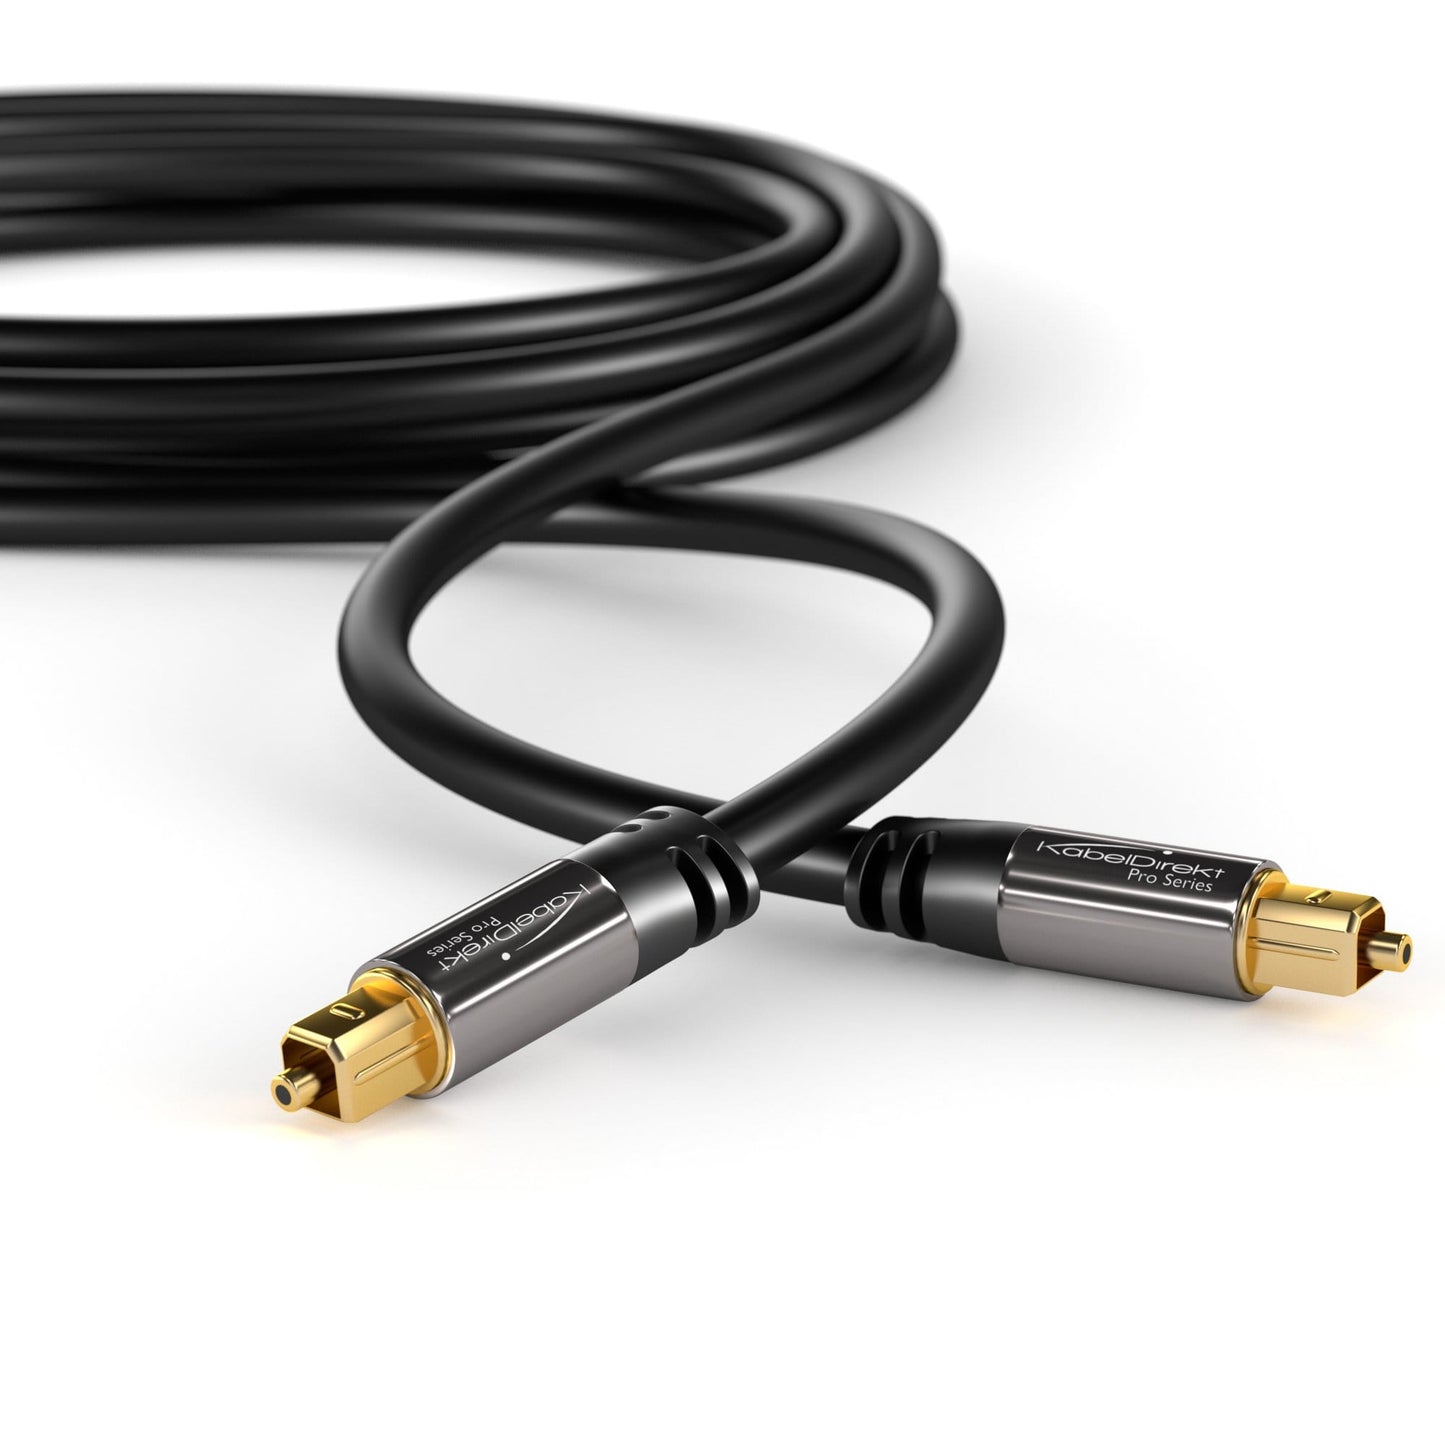 Toslink cable – digital optical audio cable for interference-free audio transmissions